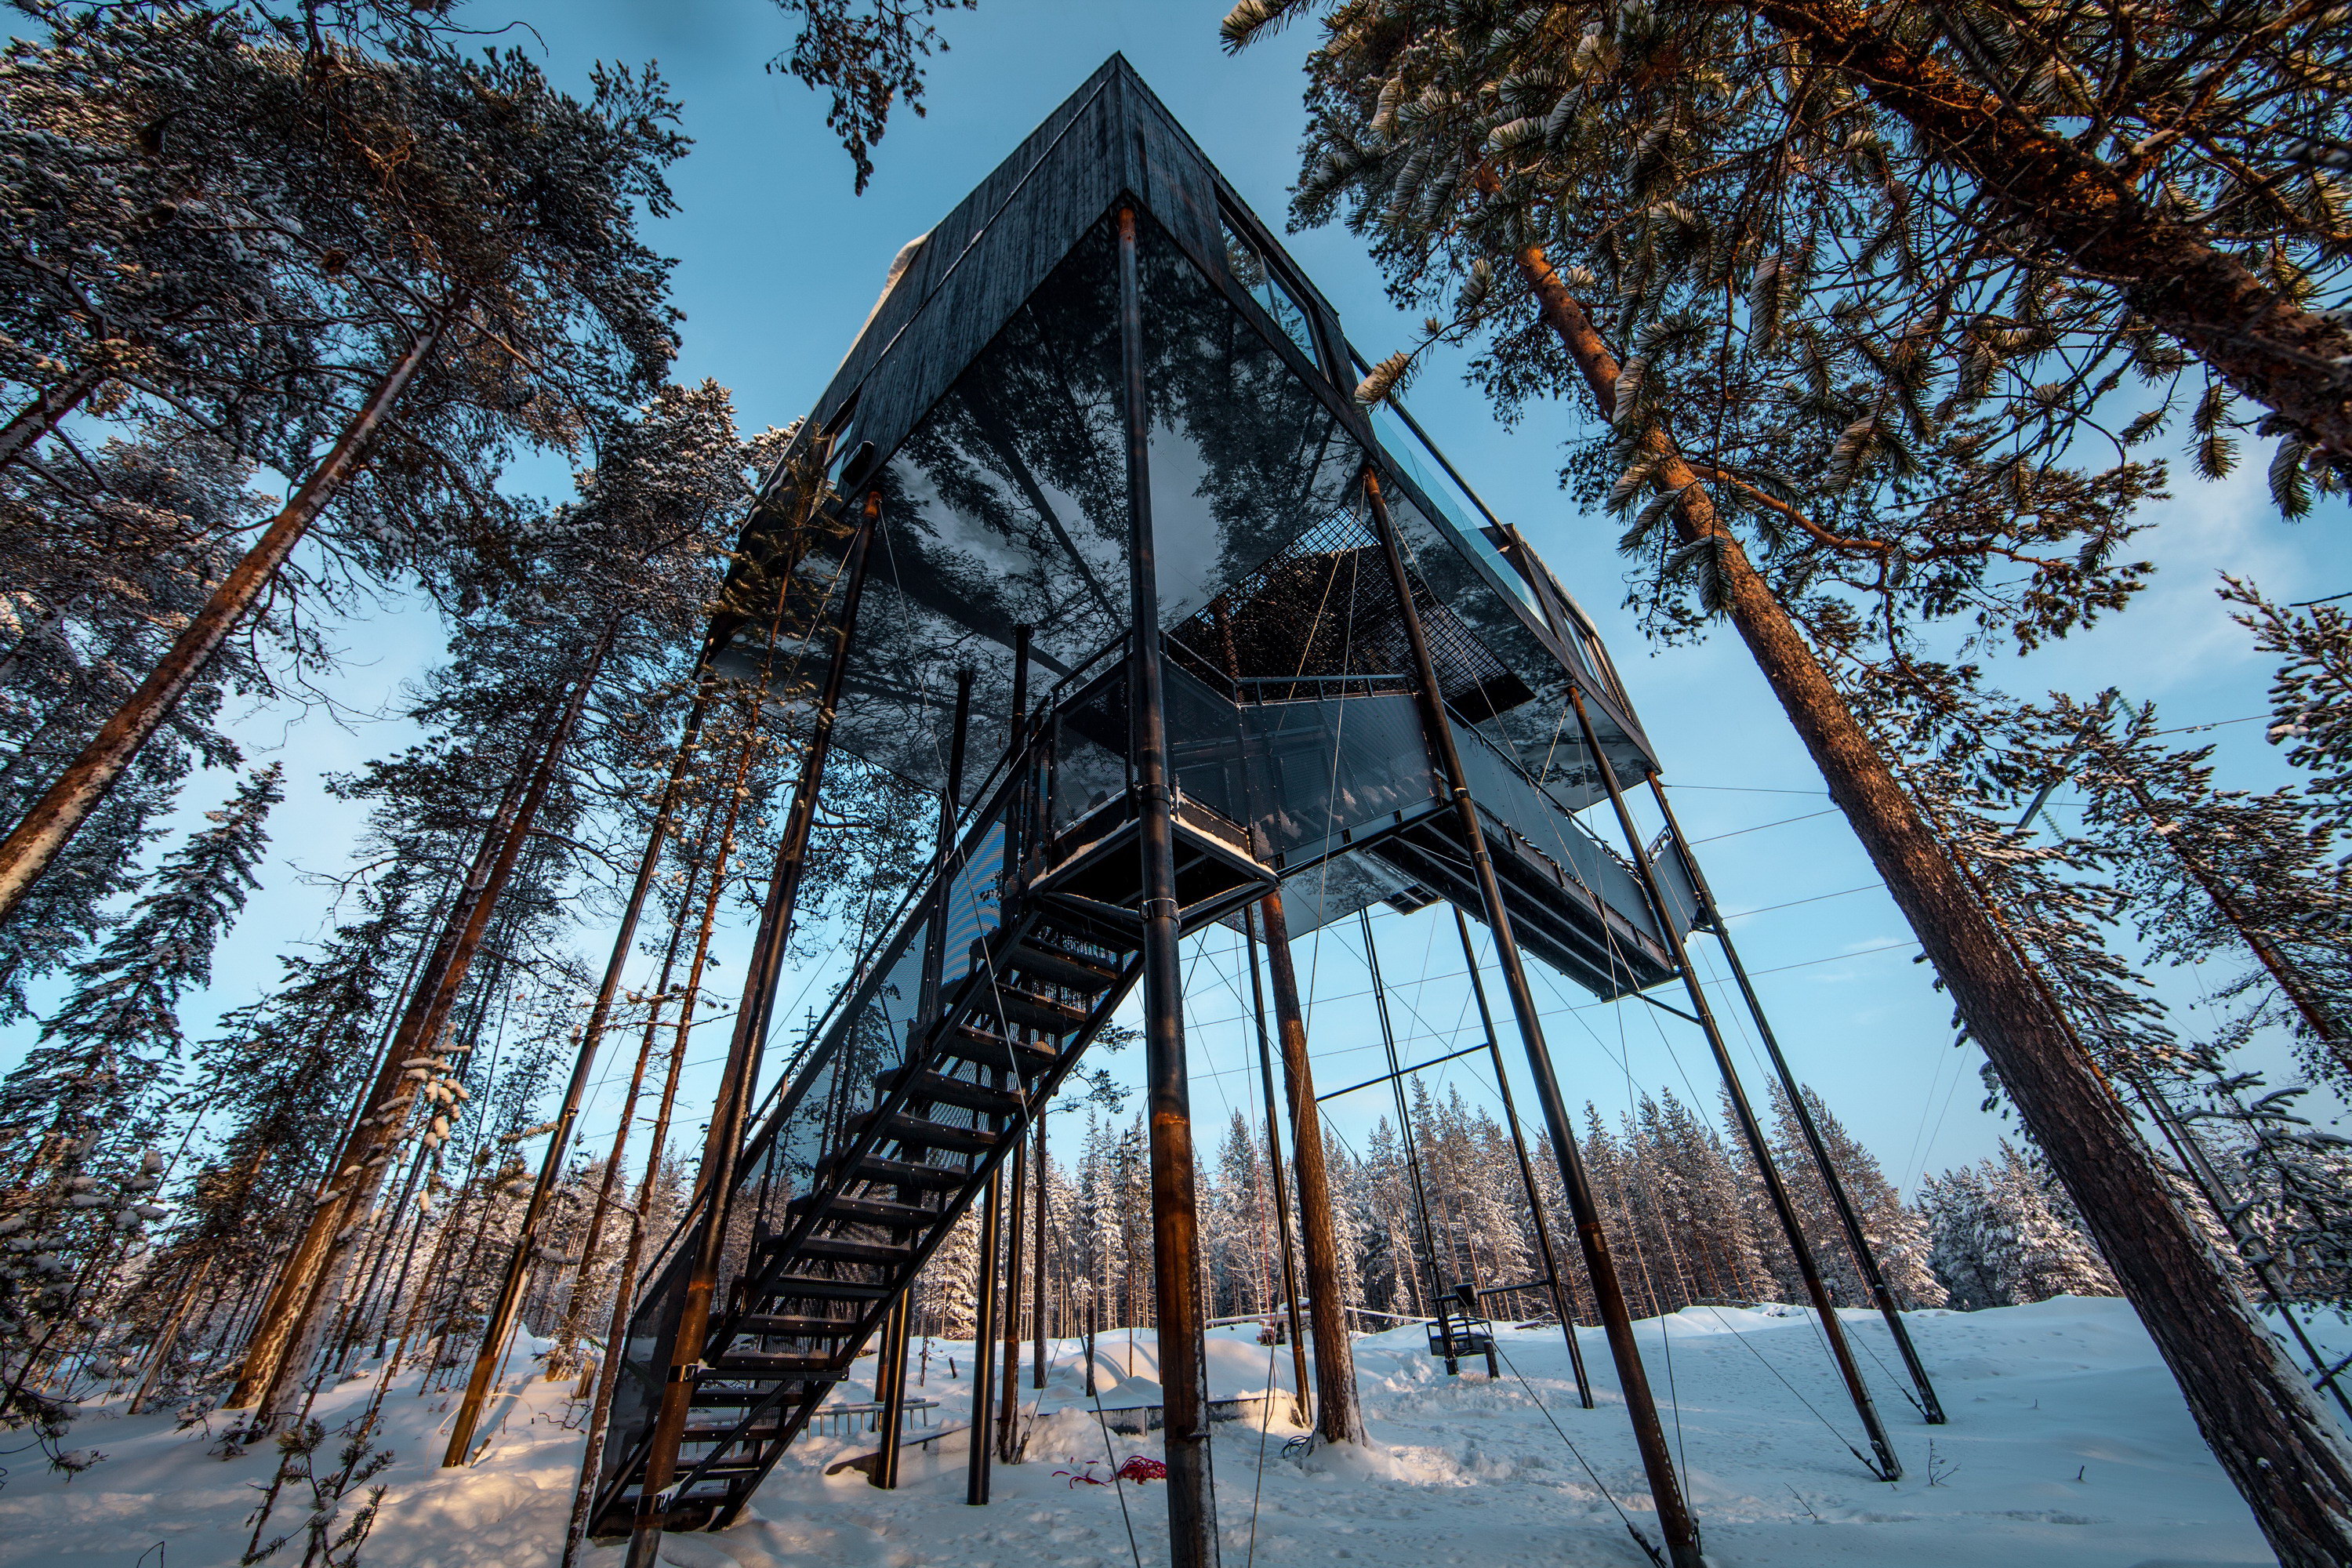 Treehotel – The 7th Room by Snøhetta